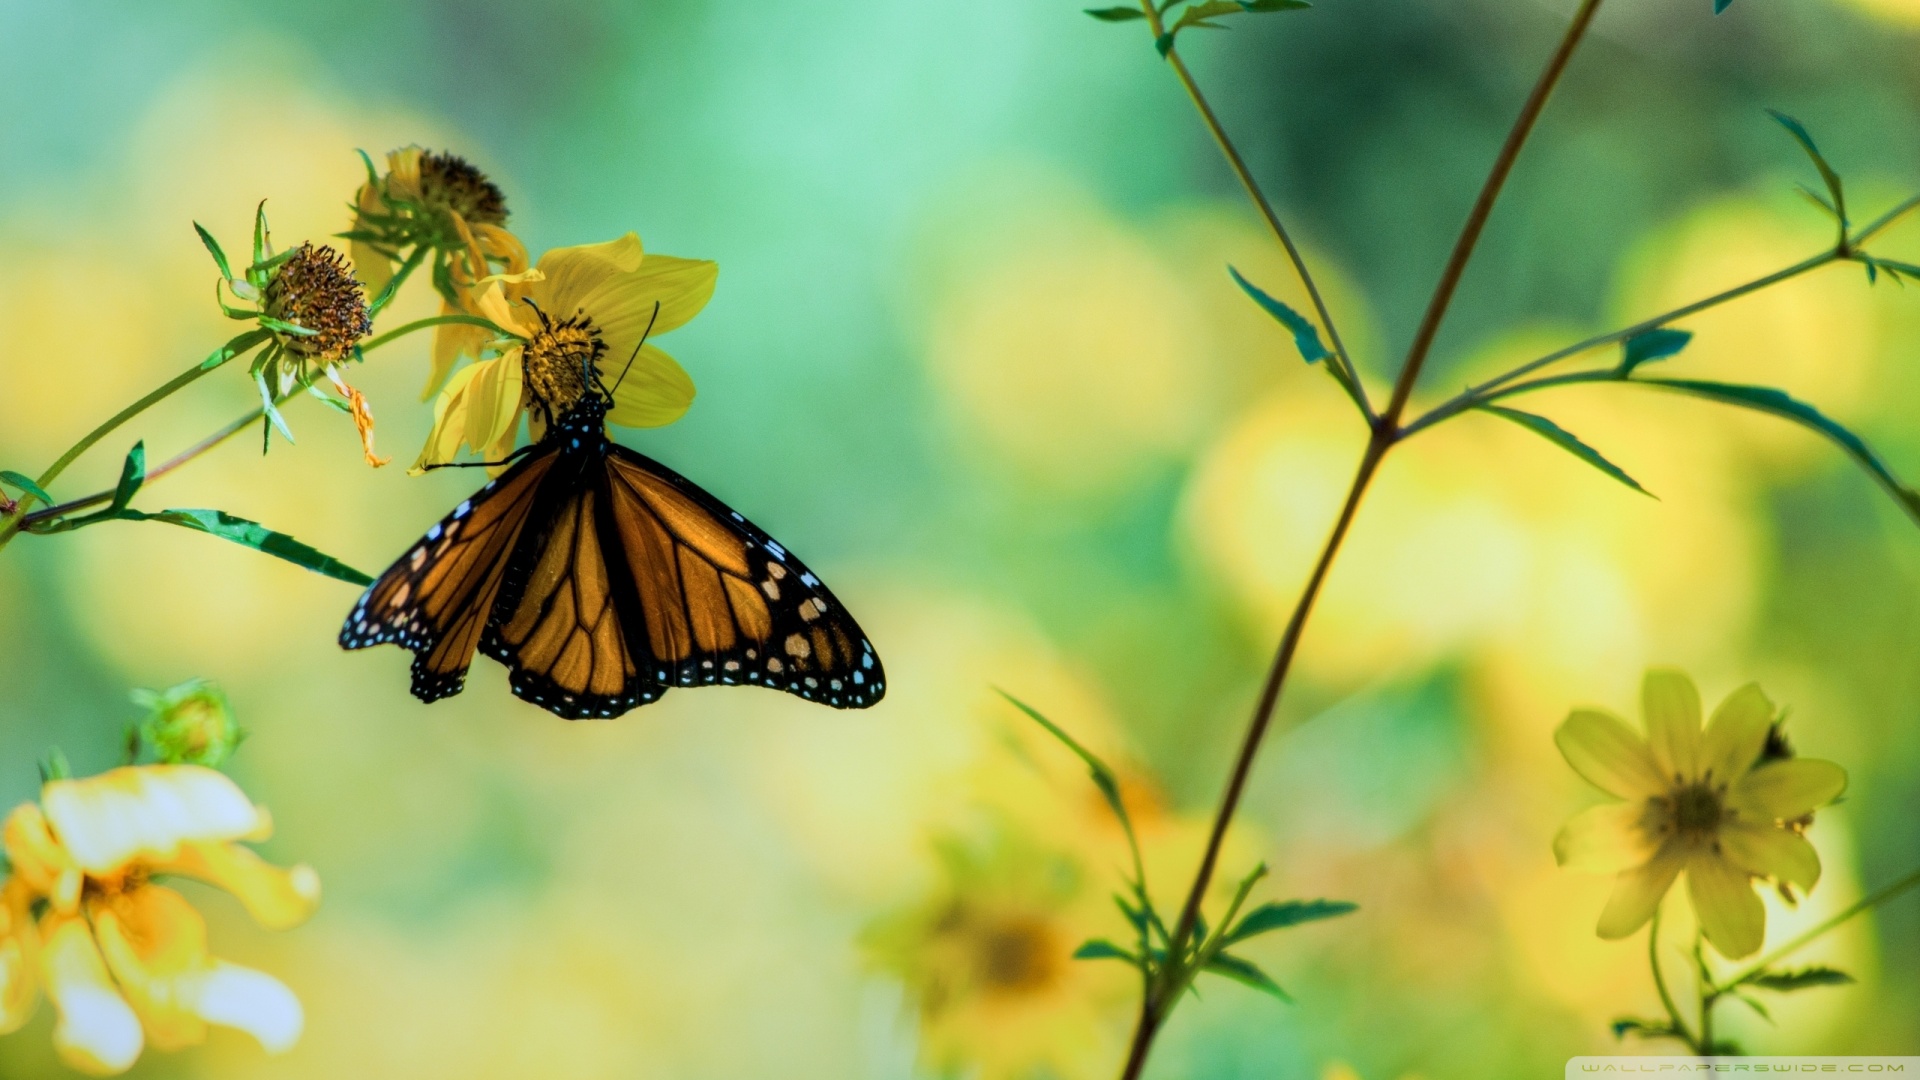 Yellow Brown Dots Designed Butterfly On Yellow Flower Green Yellow Blur  Background HD Butterfly Wallpapers  HD Wallpapers  ID 78354